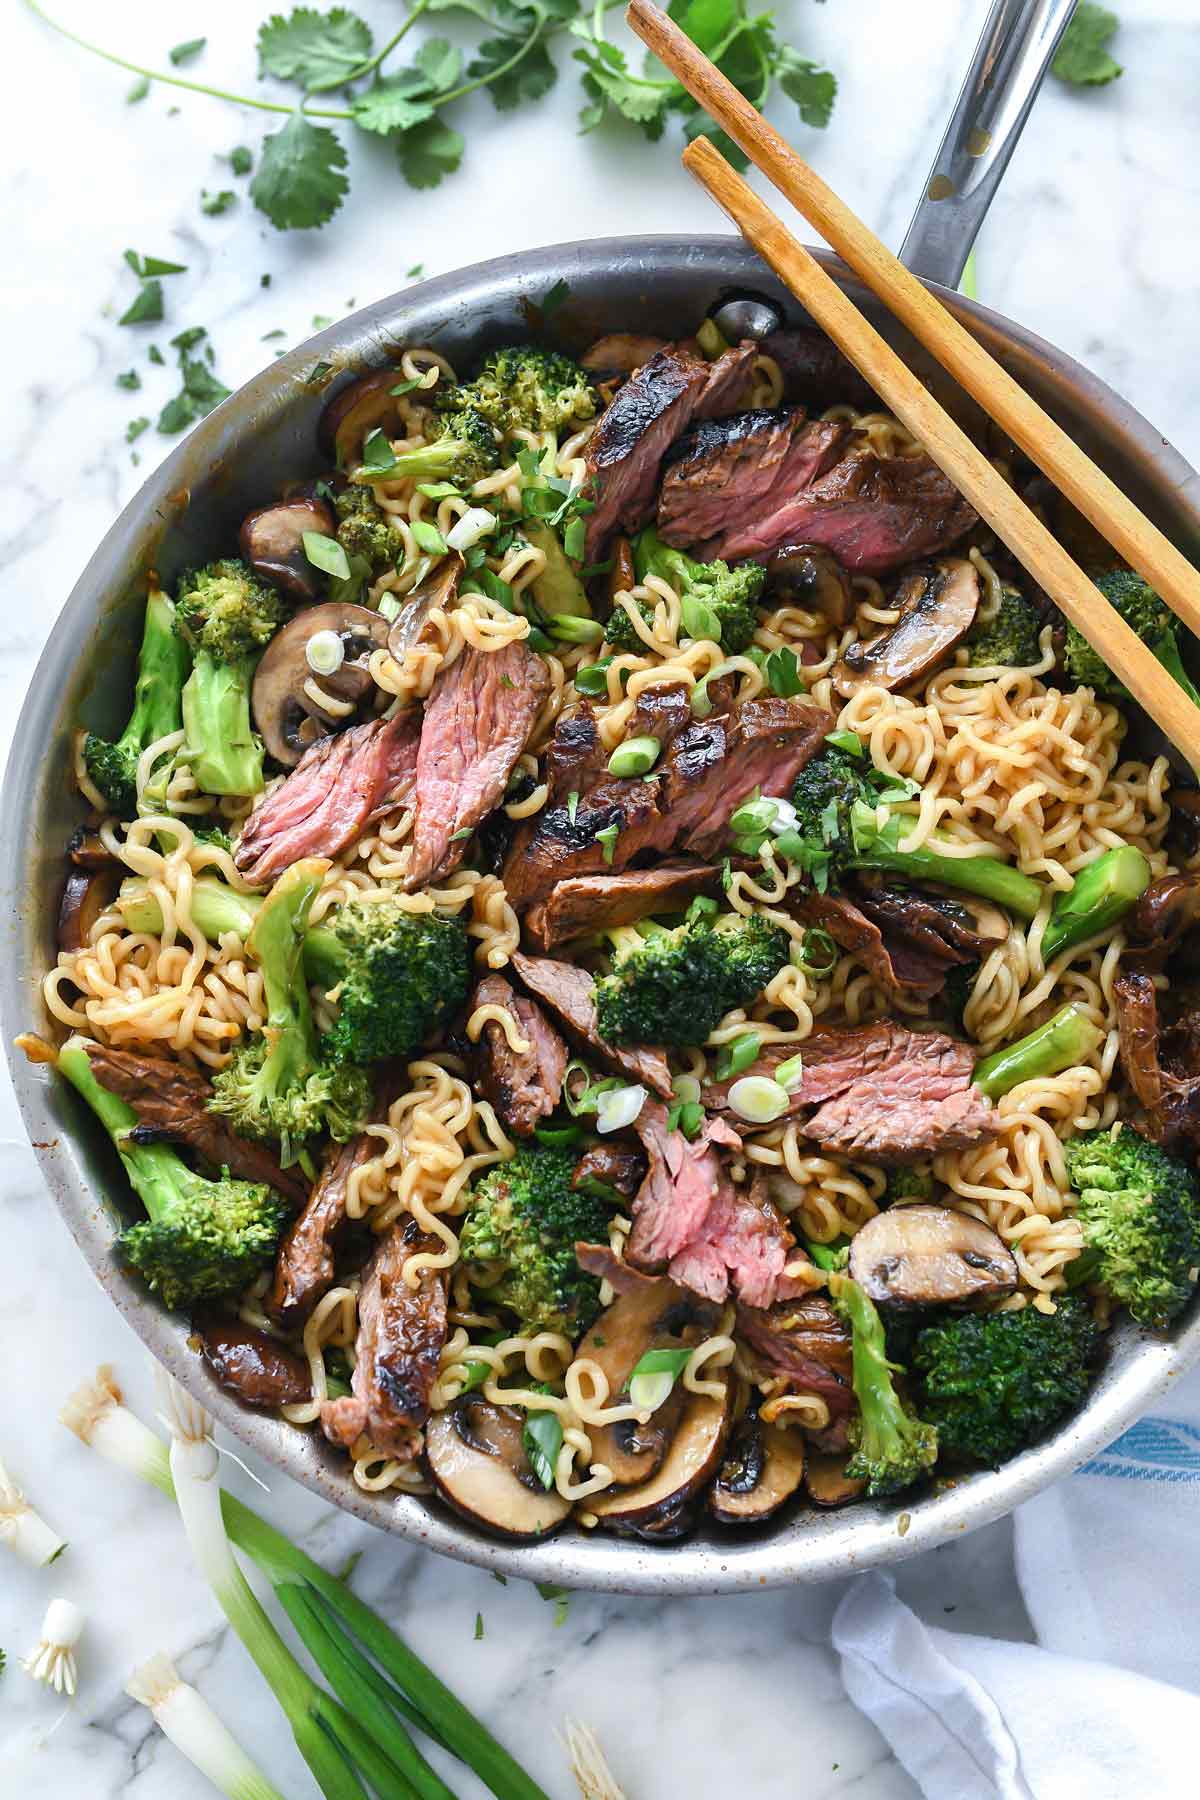 Butter Garlic Miso Noodles with Mushrooms - Carmy - Easy Healthy-ish Recipes